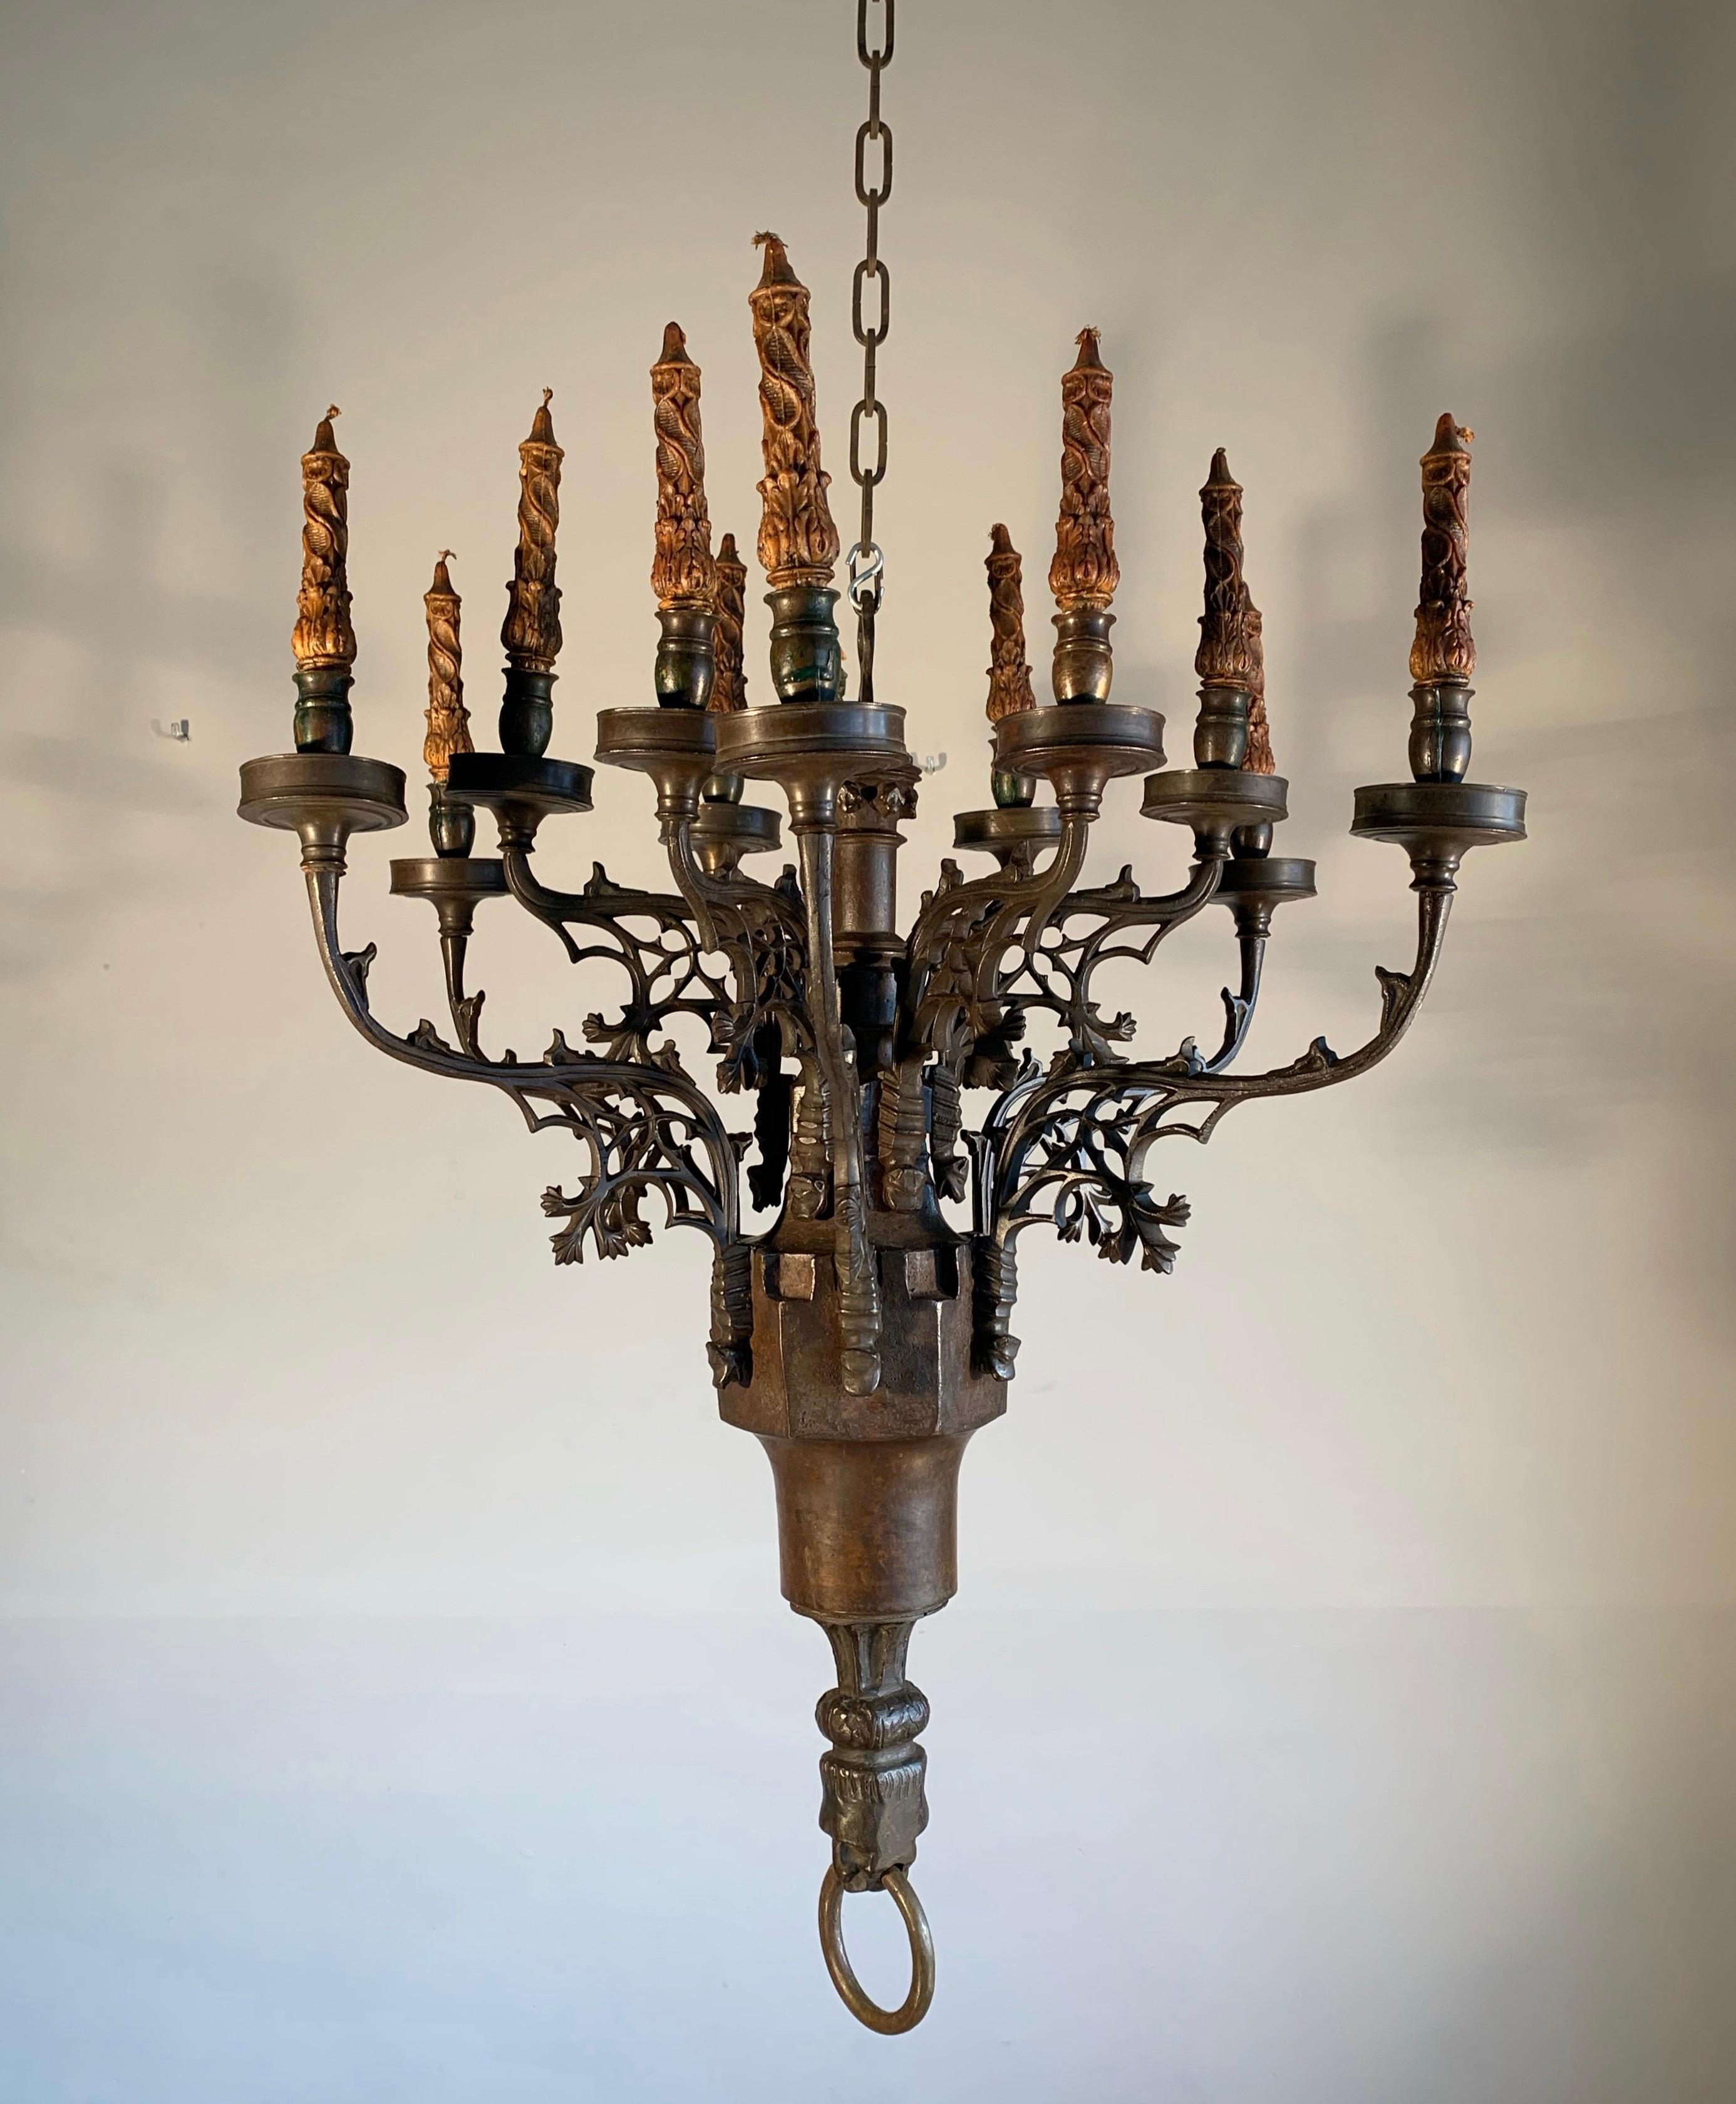 Medieval Gothic Style Candle Chandelier Wall Sconce Candlesticks Candles NEW 